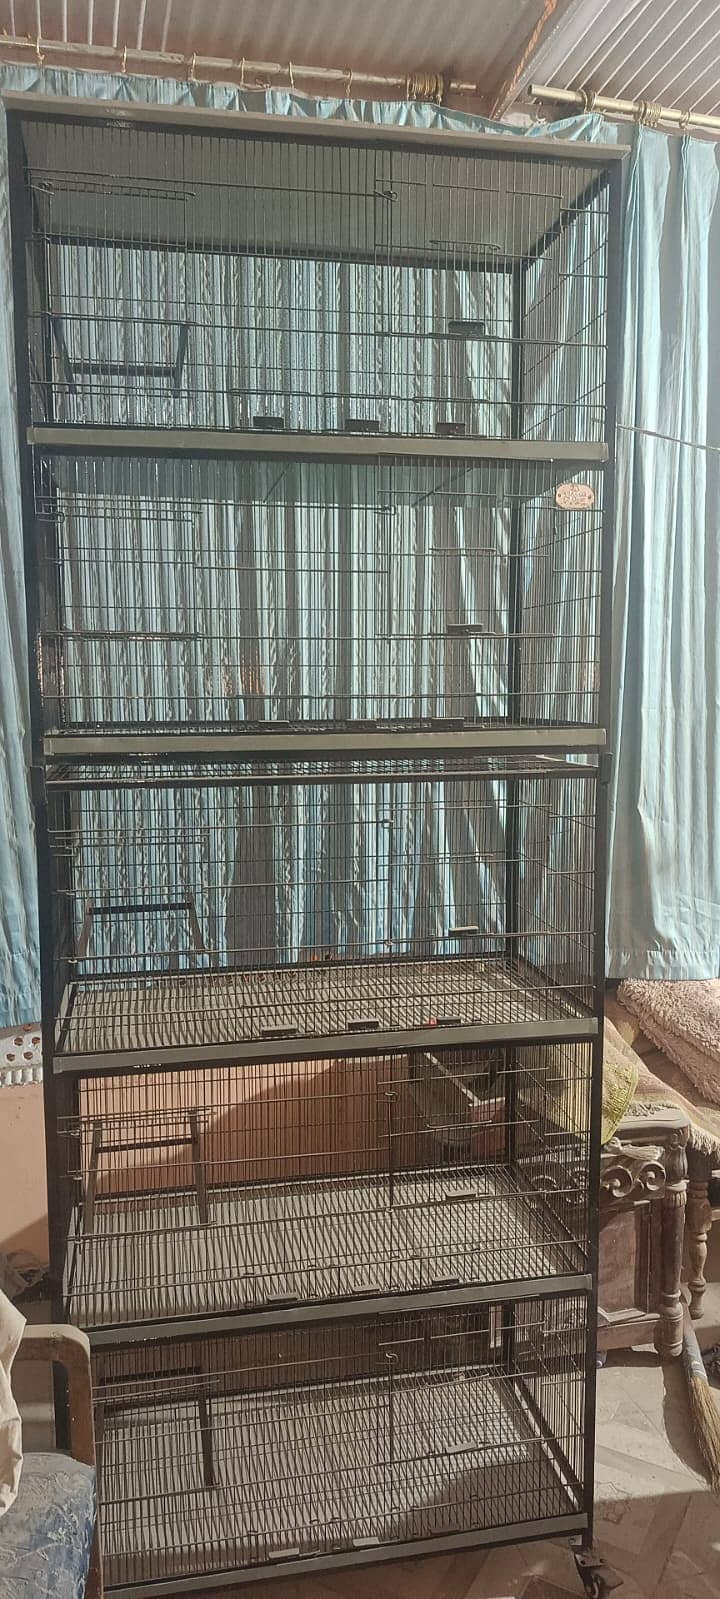 5 Portions Un Used Cage for Love Birds 0